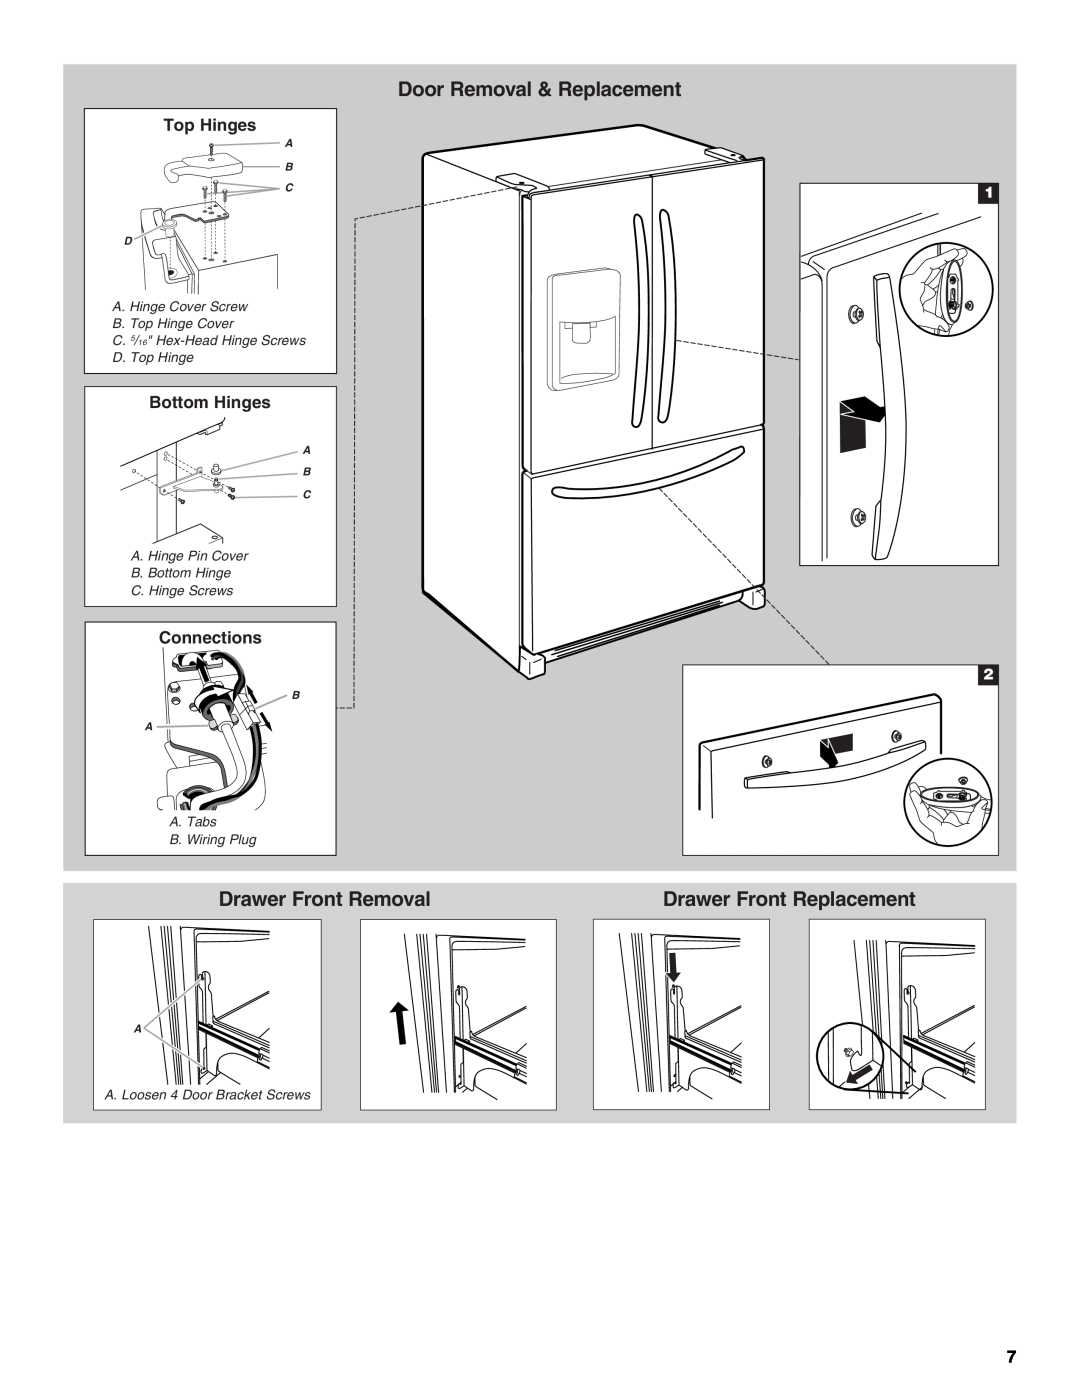 Whirlpool W10215185A Door Removal & Replacement, Drawer Front Removal, Drawer Front Replacement, Top Hinges, Bottom Hinges 